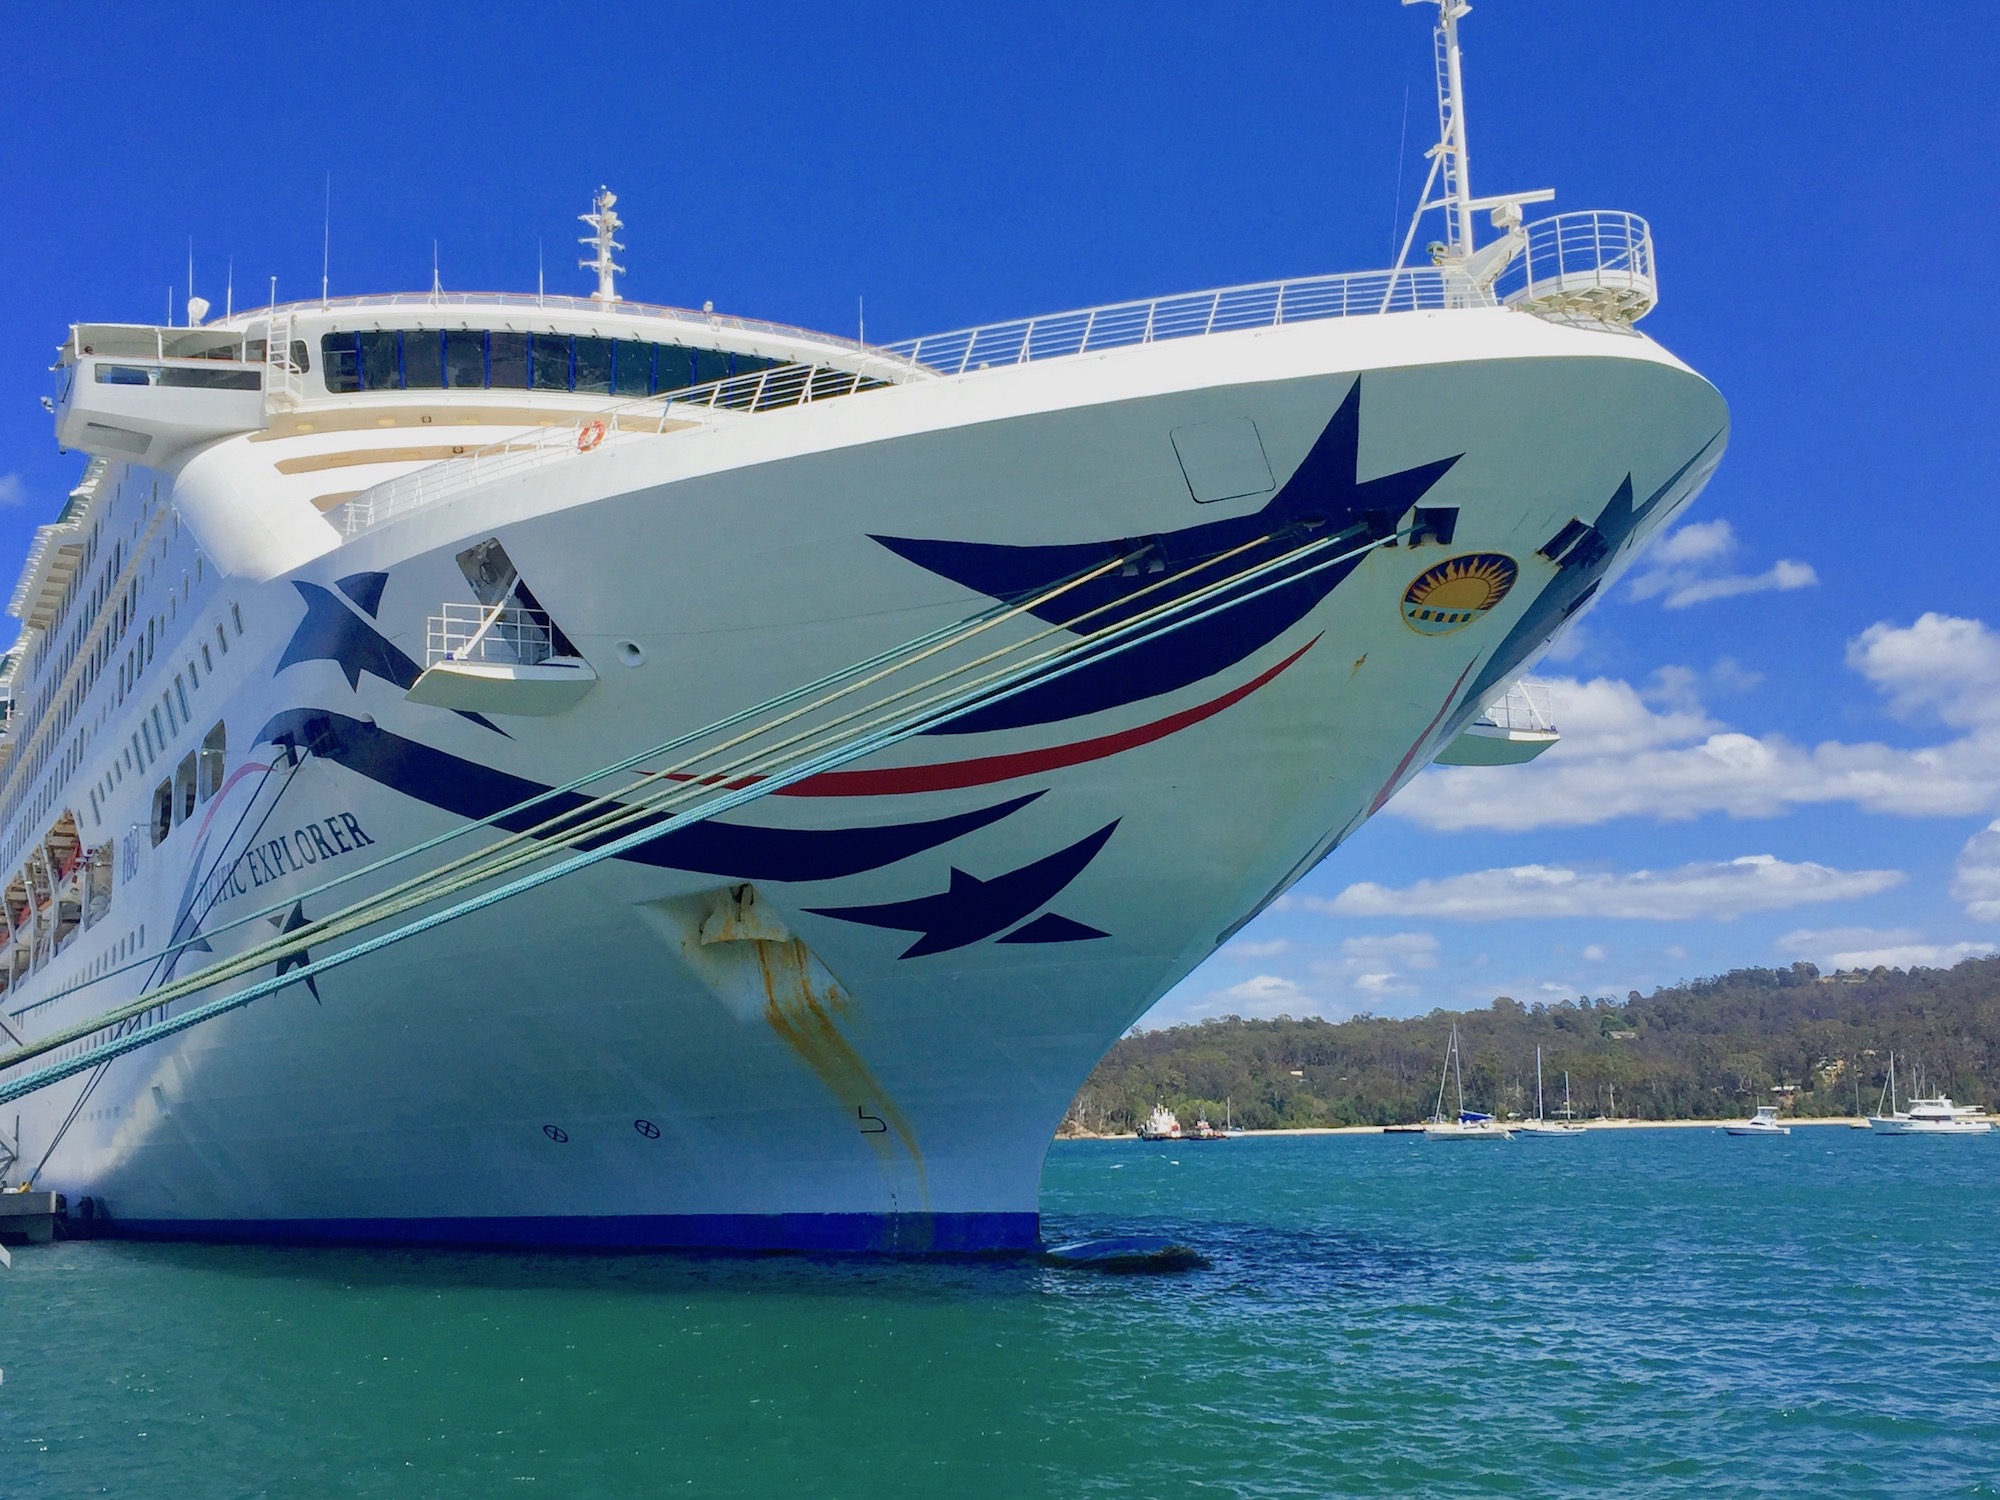 Intrepid explorers enjoy Eden's fare, history and experiences from new Cruise Wharf